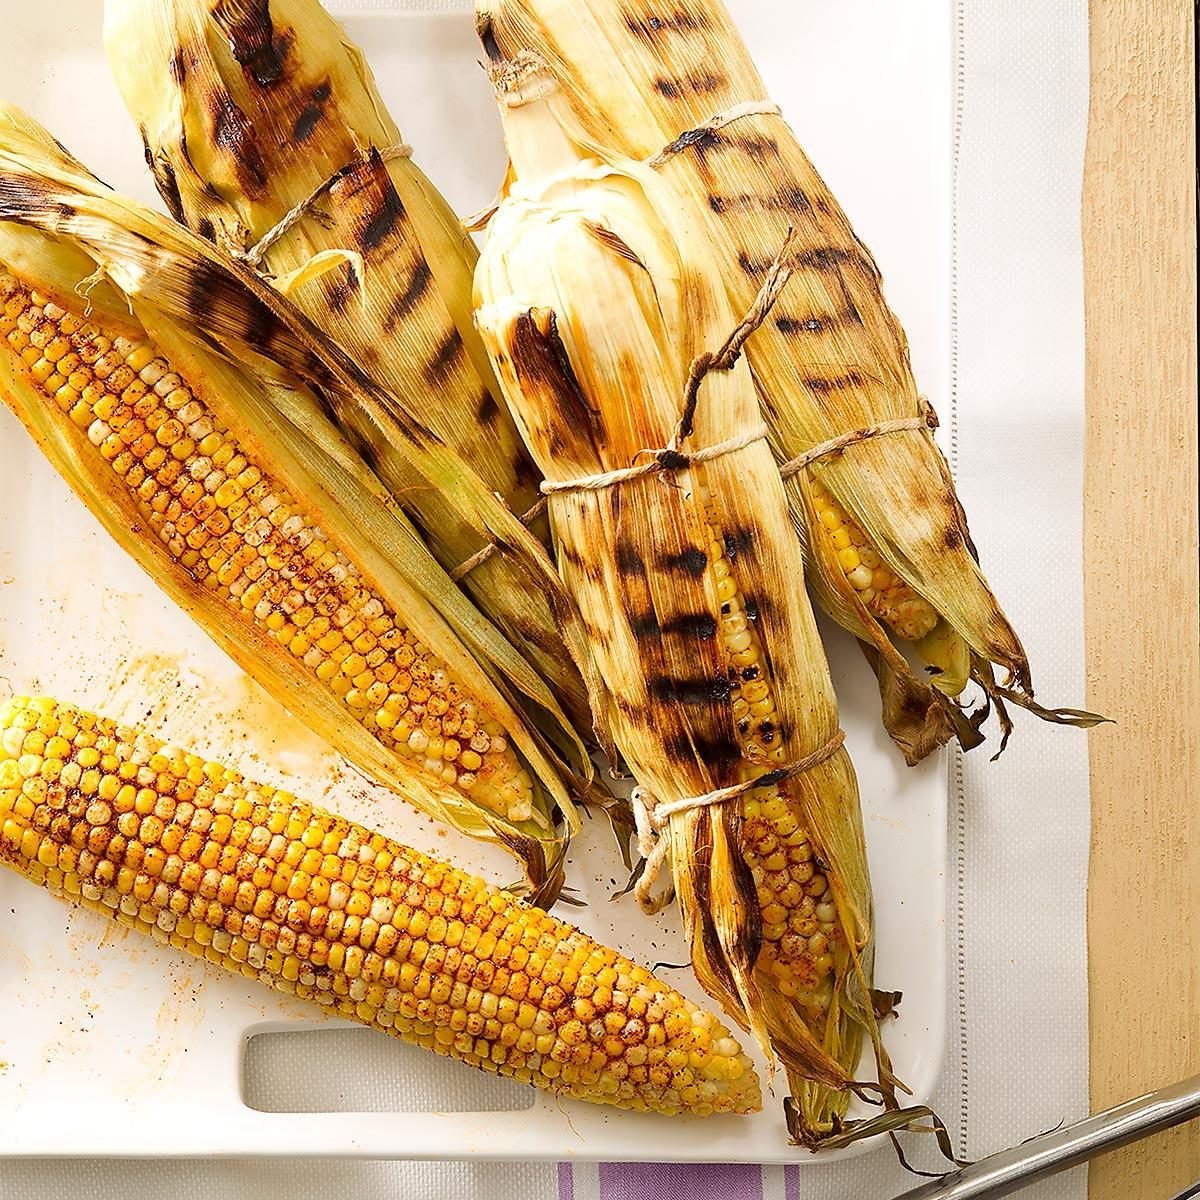 Smoky Grilled Corn on the Cob Recipe | Taste of Home1200 x 1200